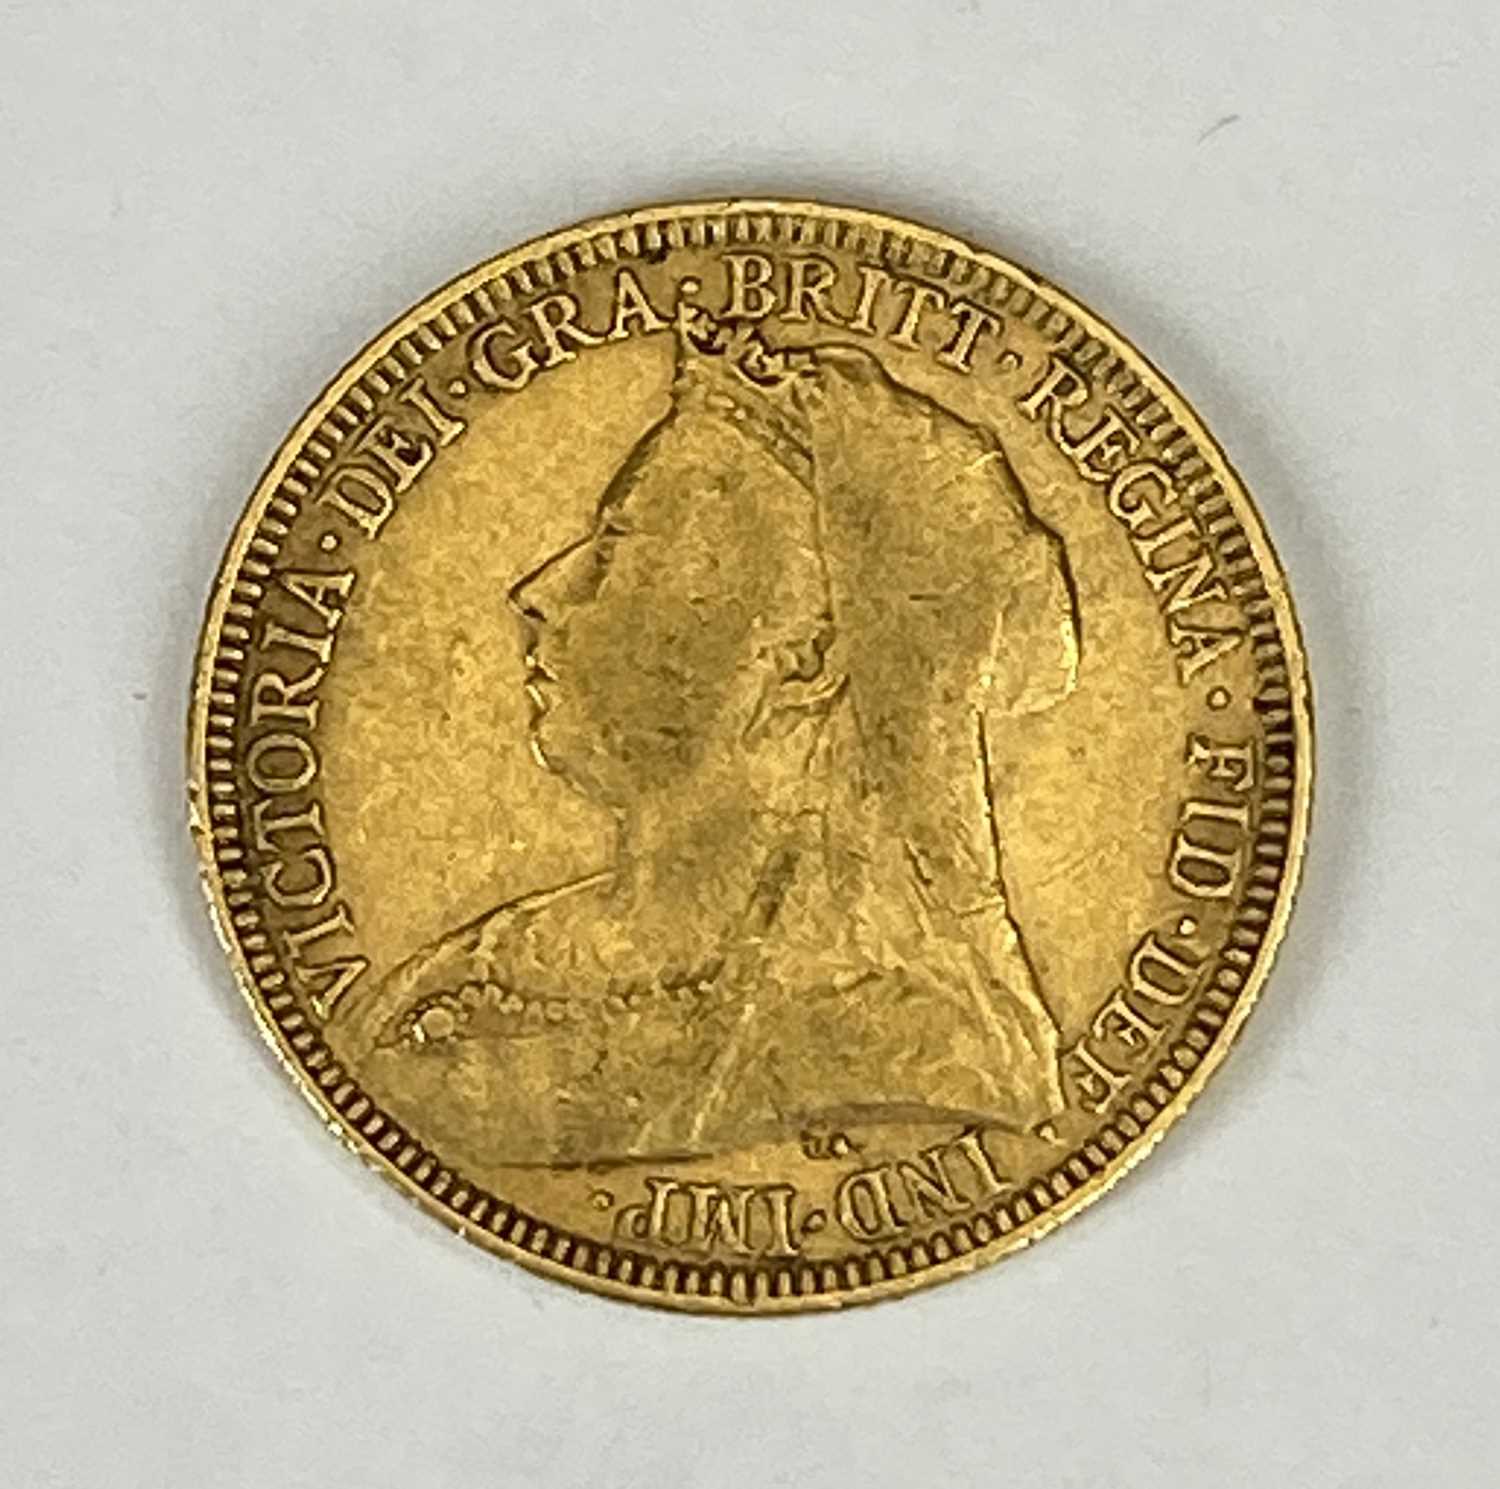 QUEEN VICTORIA VEILED BUST GOLD FULL SOVEREIGN, 1893, 8g Provenance: private collection Gwynedd - Image 2 of 2